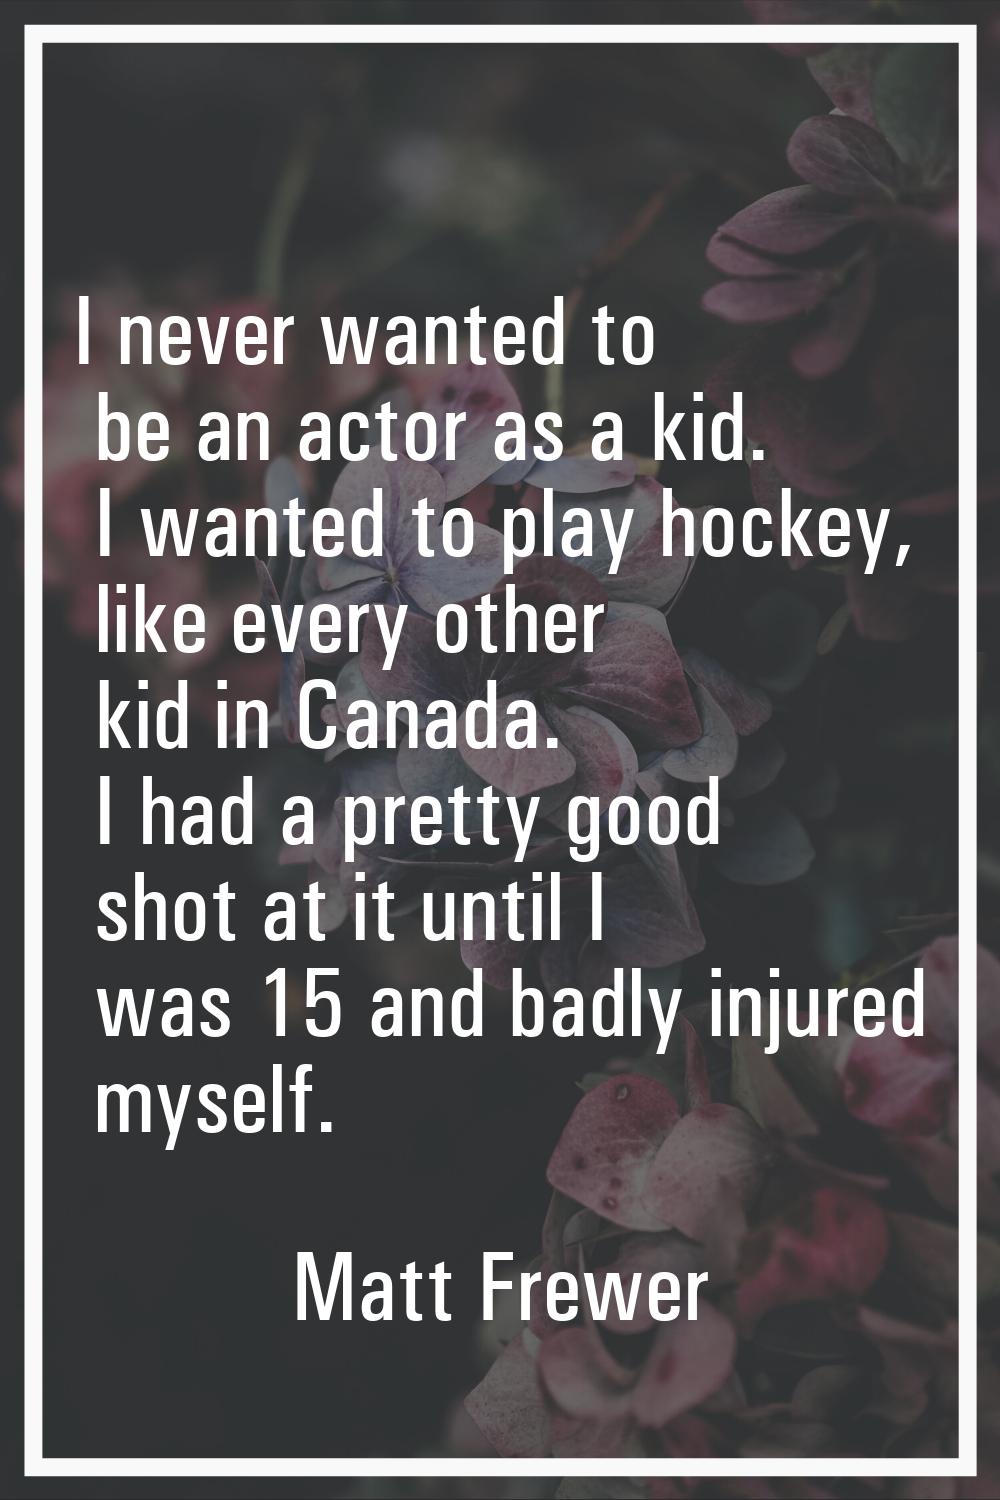 I never wanted to be an actor as a kid. I wanted to play hockey, like every other kid in Canada. I 